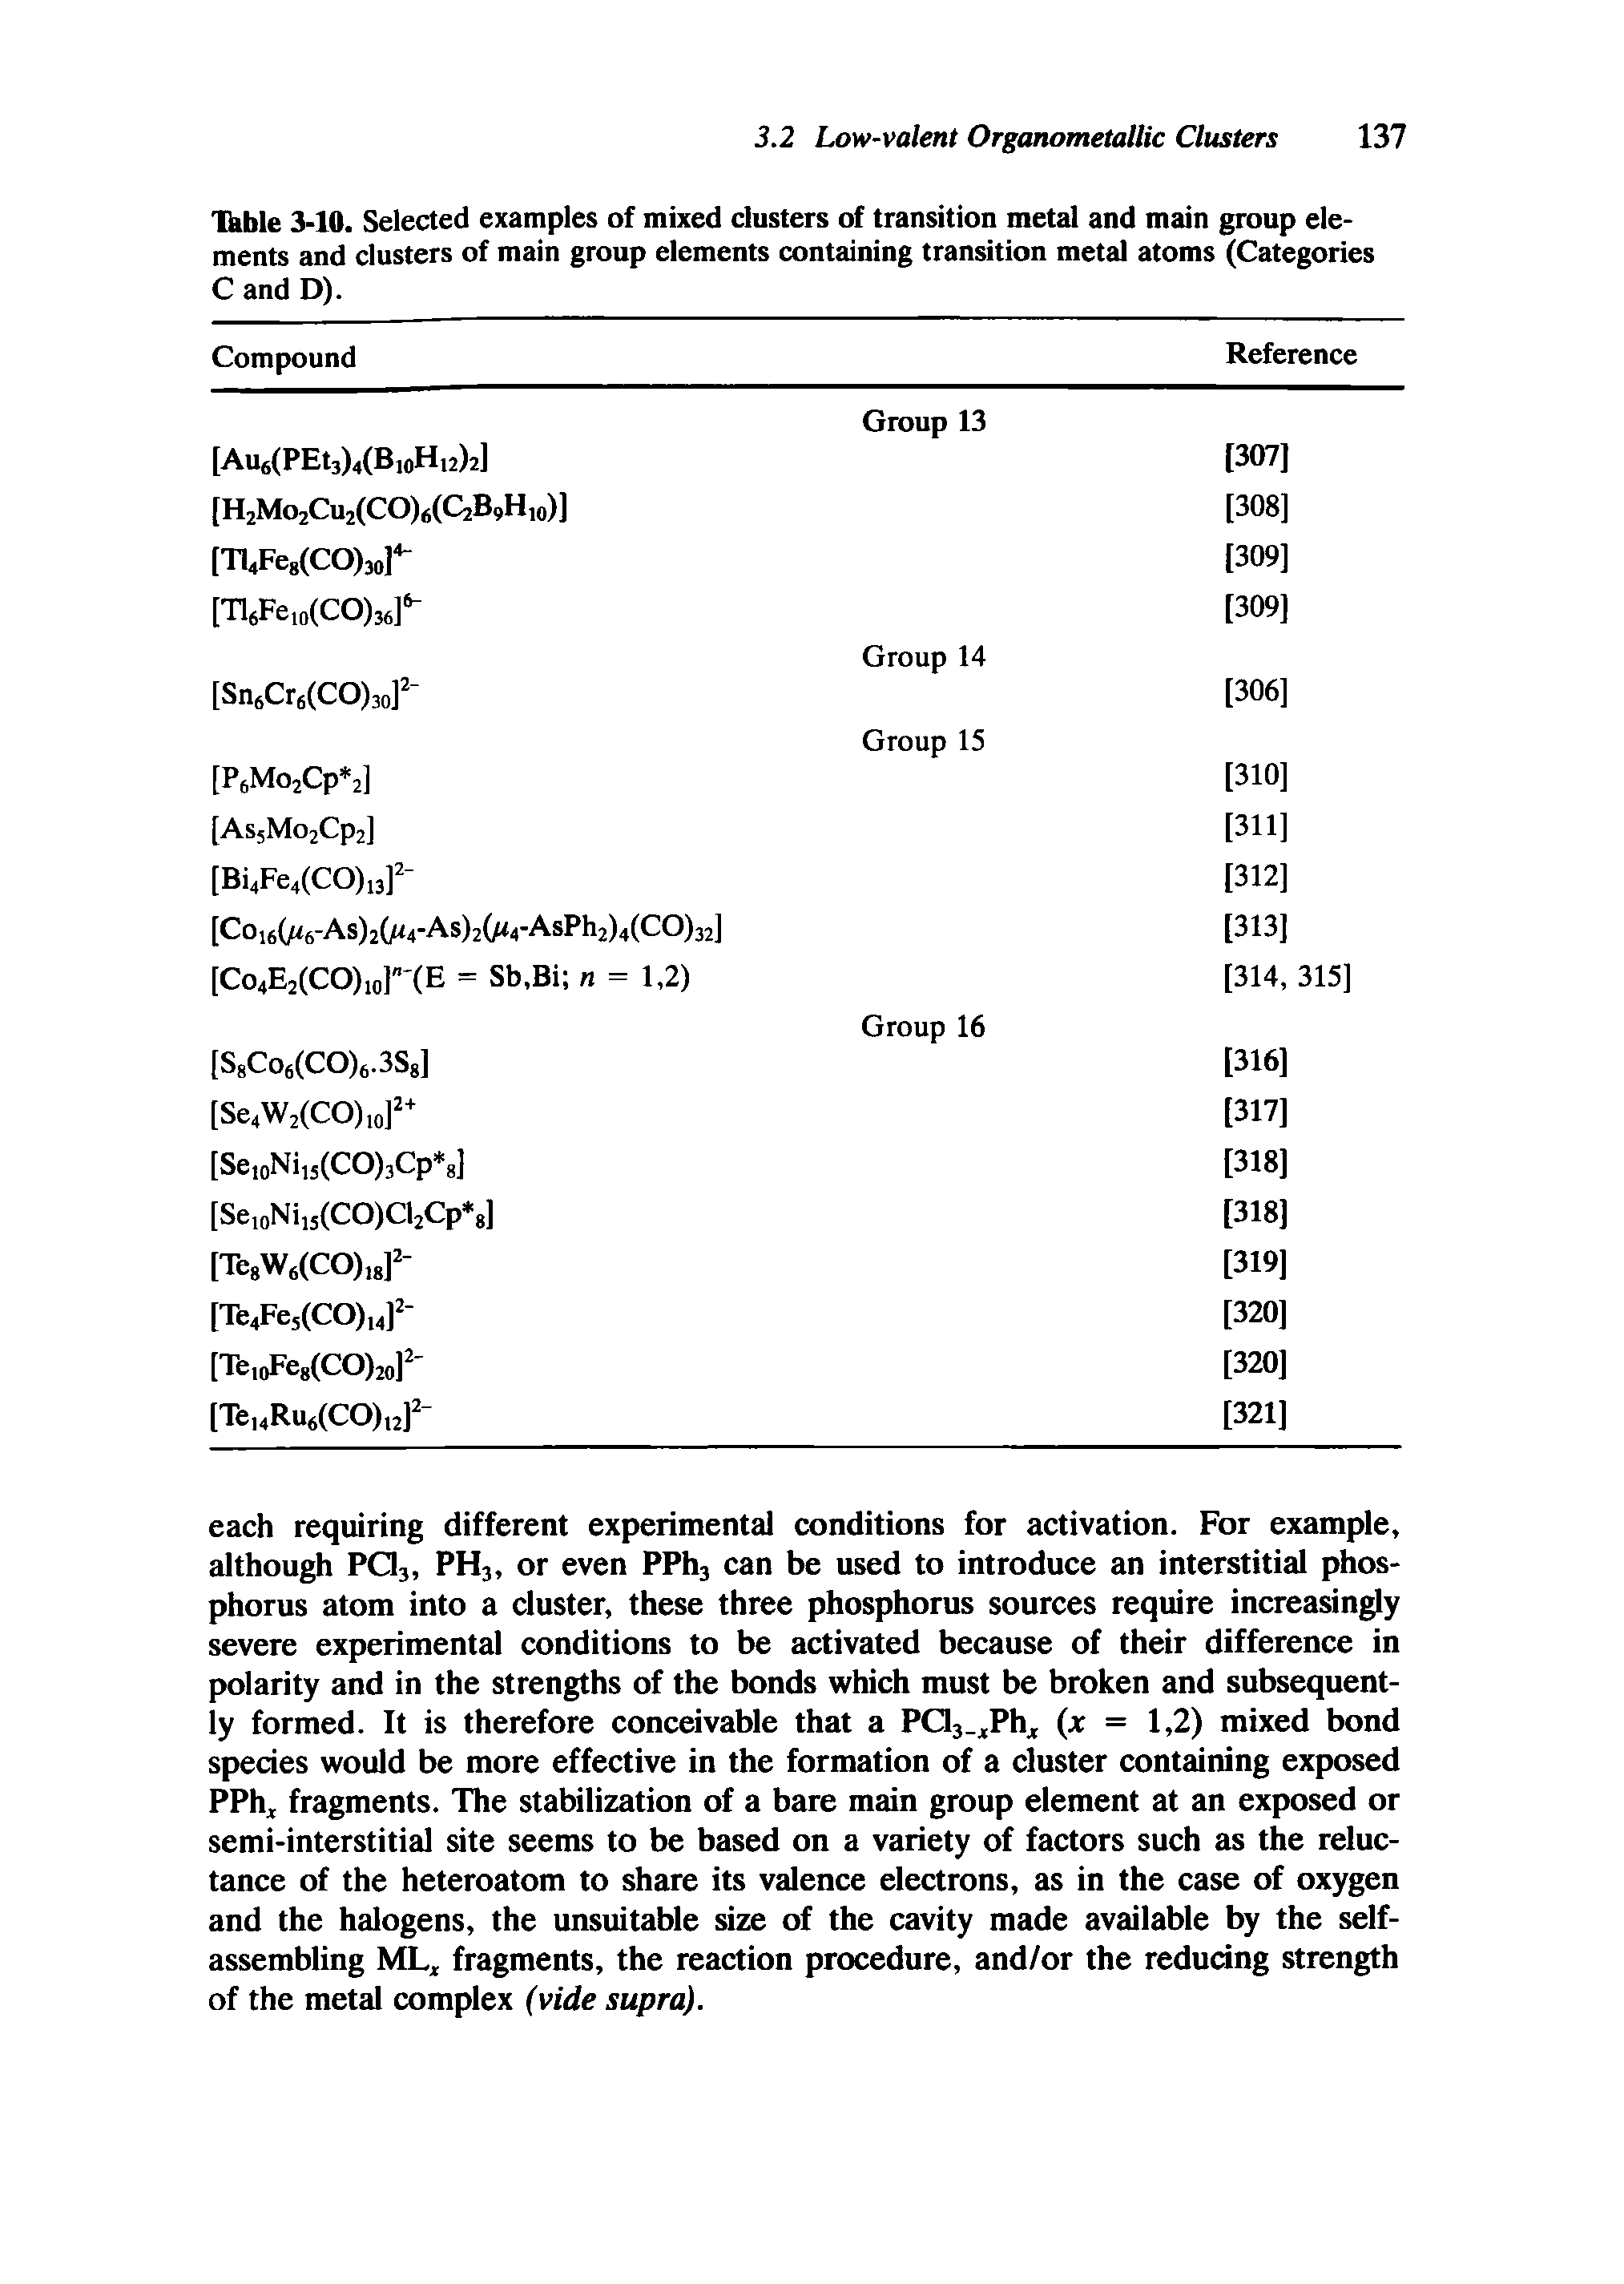 Table 3-10. Selected examples of mixed dusters of transition metal and main group elements and clusters of main group elements containing transition metal atoms (Categories C and D).